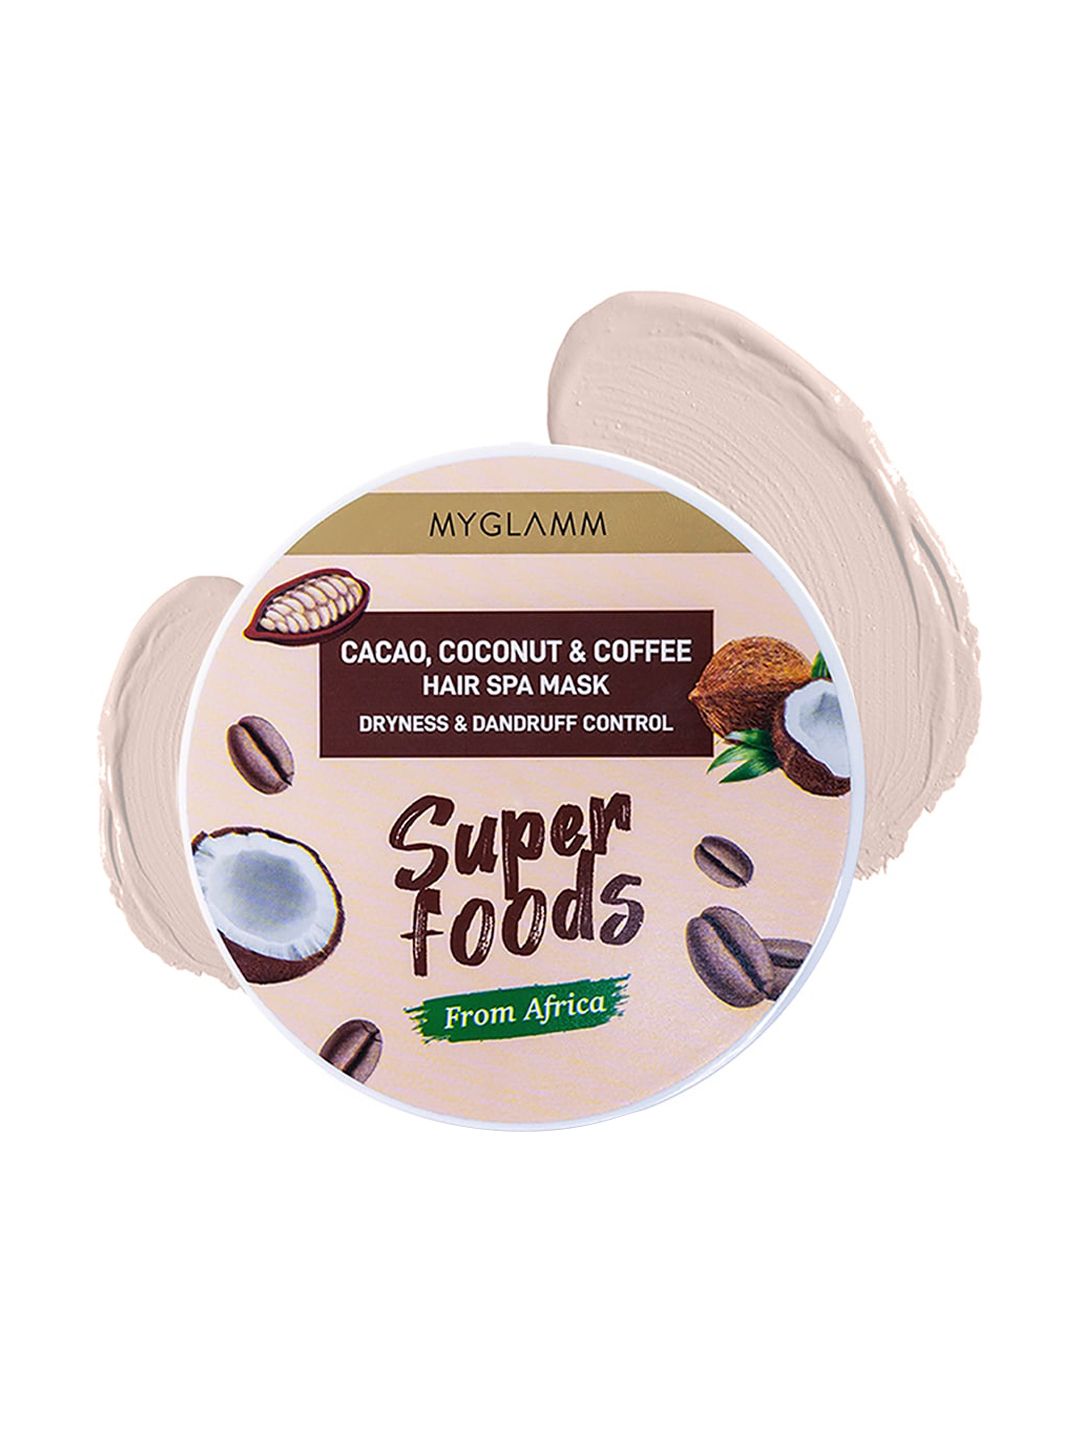 MyGlamm Superfoods Cacao Coconut & Coffee Hair Spa Mask - 200 g Price in India